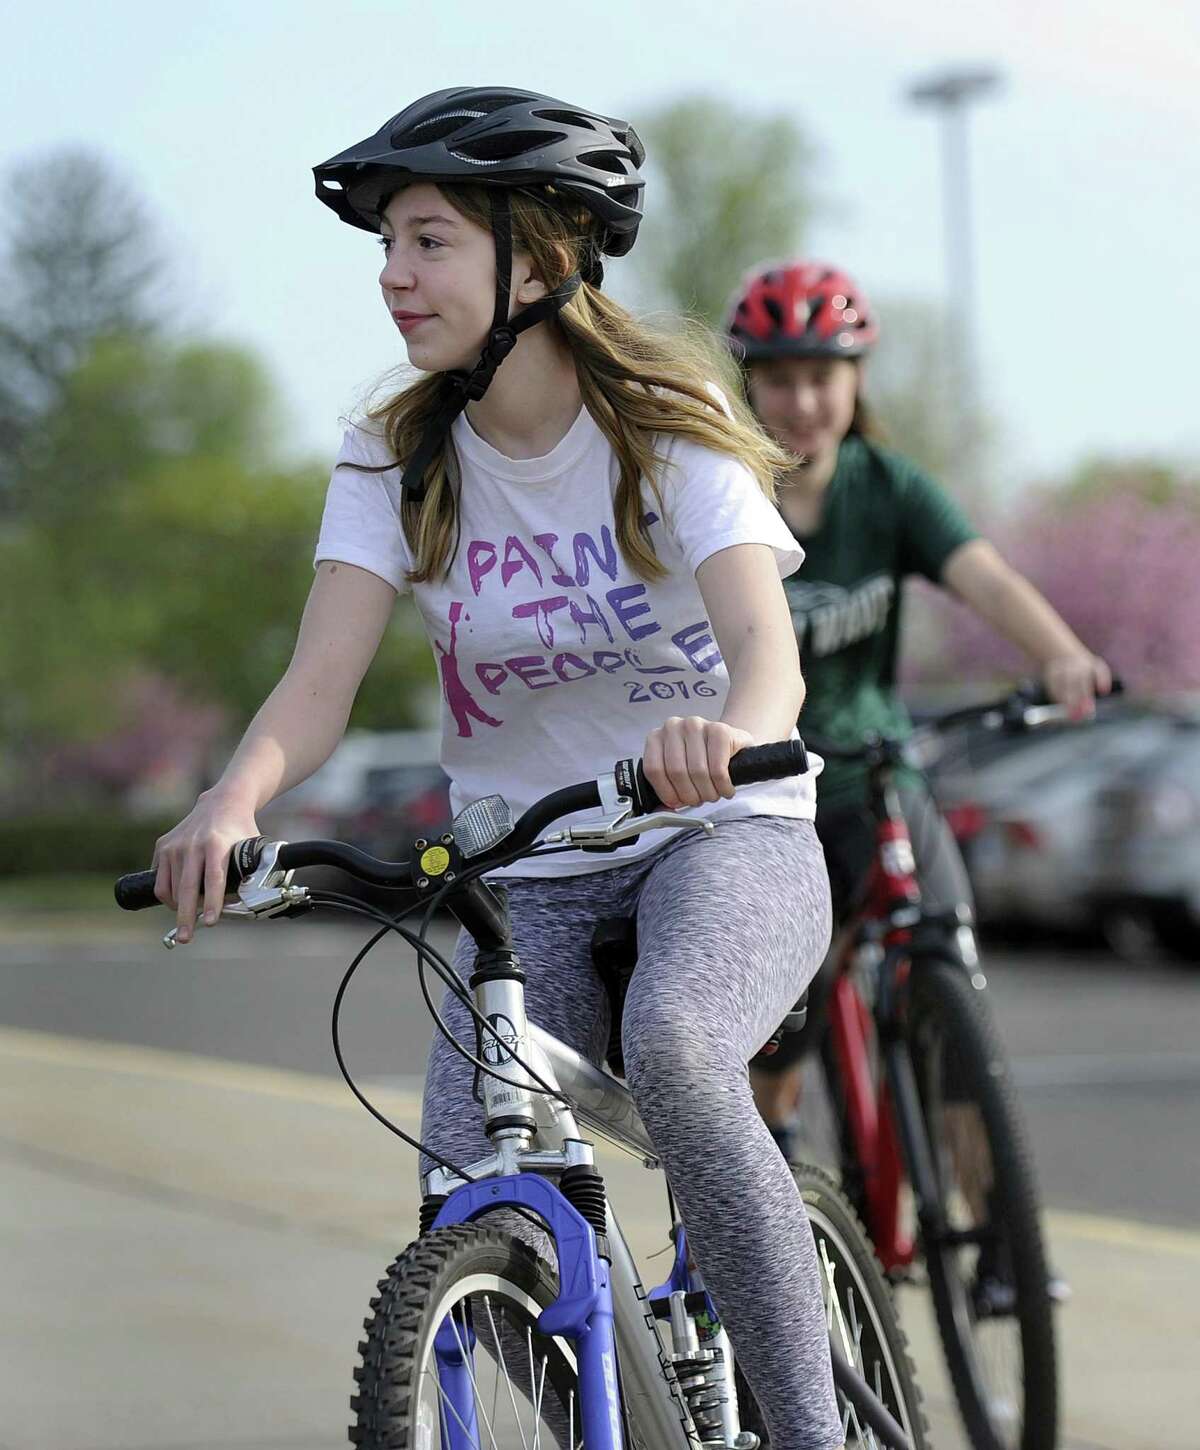 Kati Seppa, 14, and Lilian Viti, 15, behind her, ride bicycles around New Milford High School Monday morning, May 7, 2018. The school started a new bike safety initiative where students learn these skills in gym class.